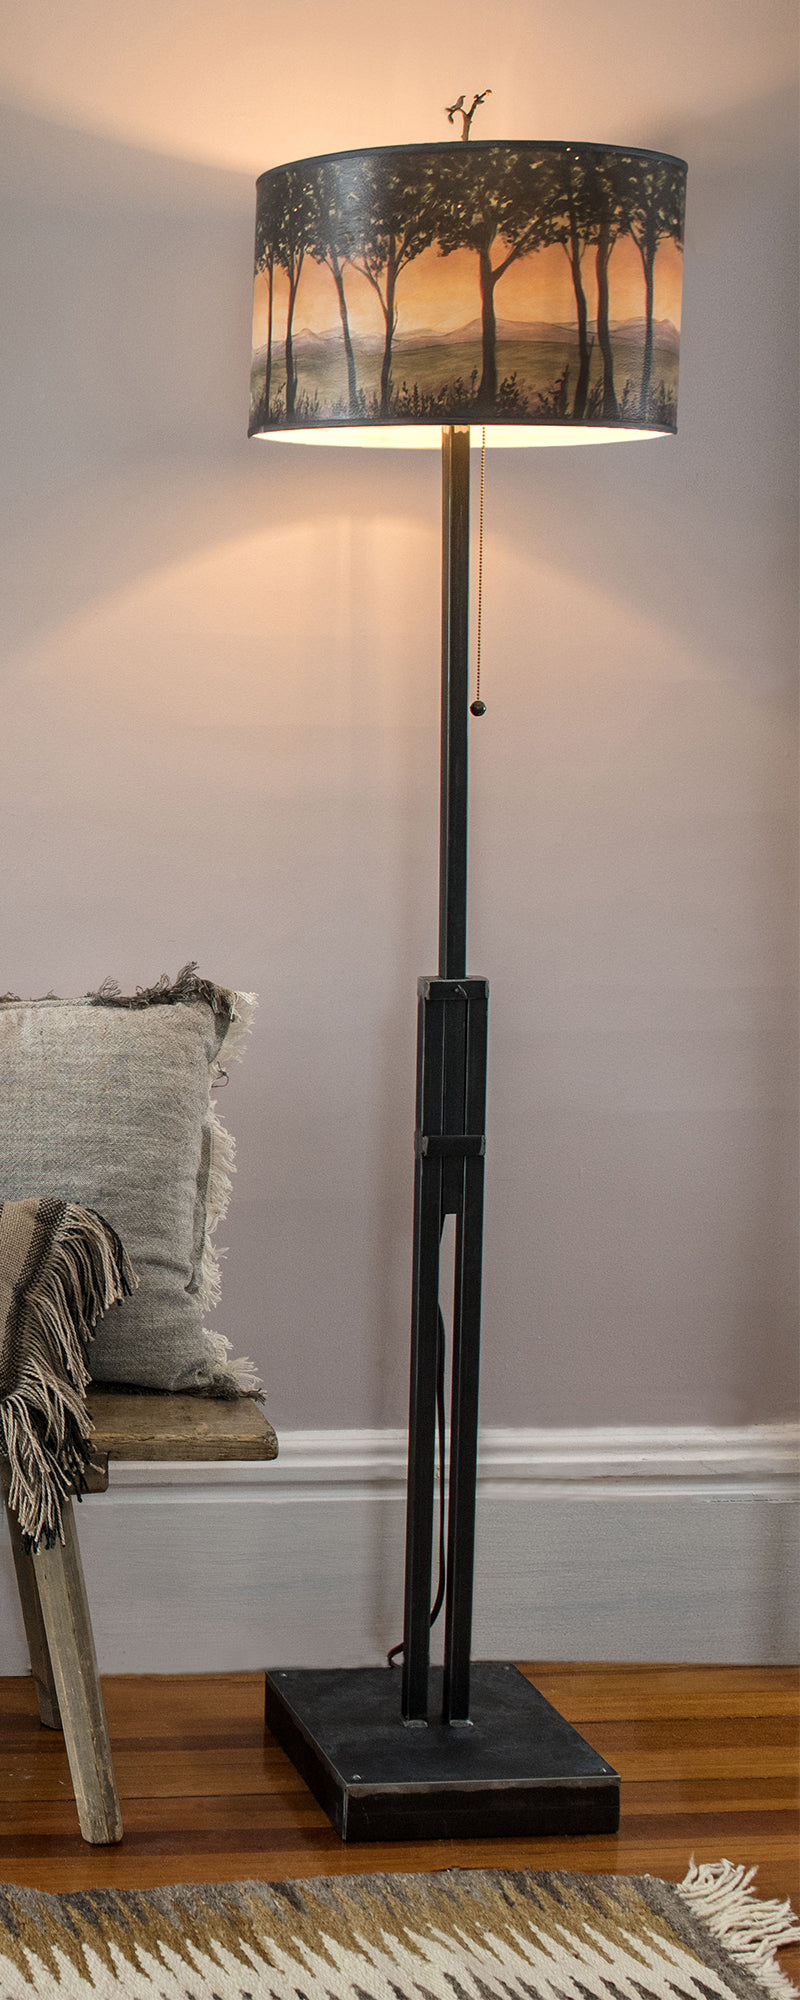 Janna Ugone &amp; Co Floor Lamps Adjustable-Height Steel Floor Lamp with Large Drum Shade in Dawn